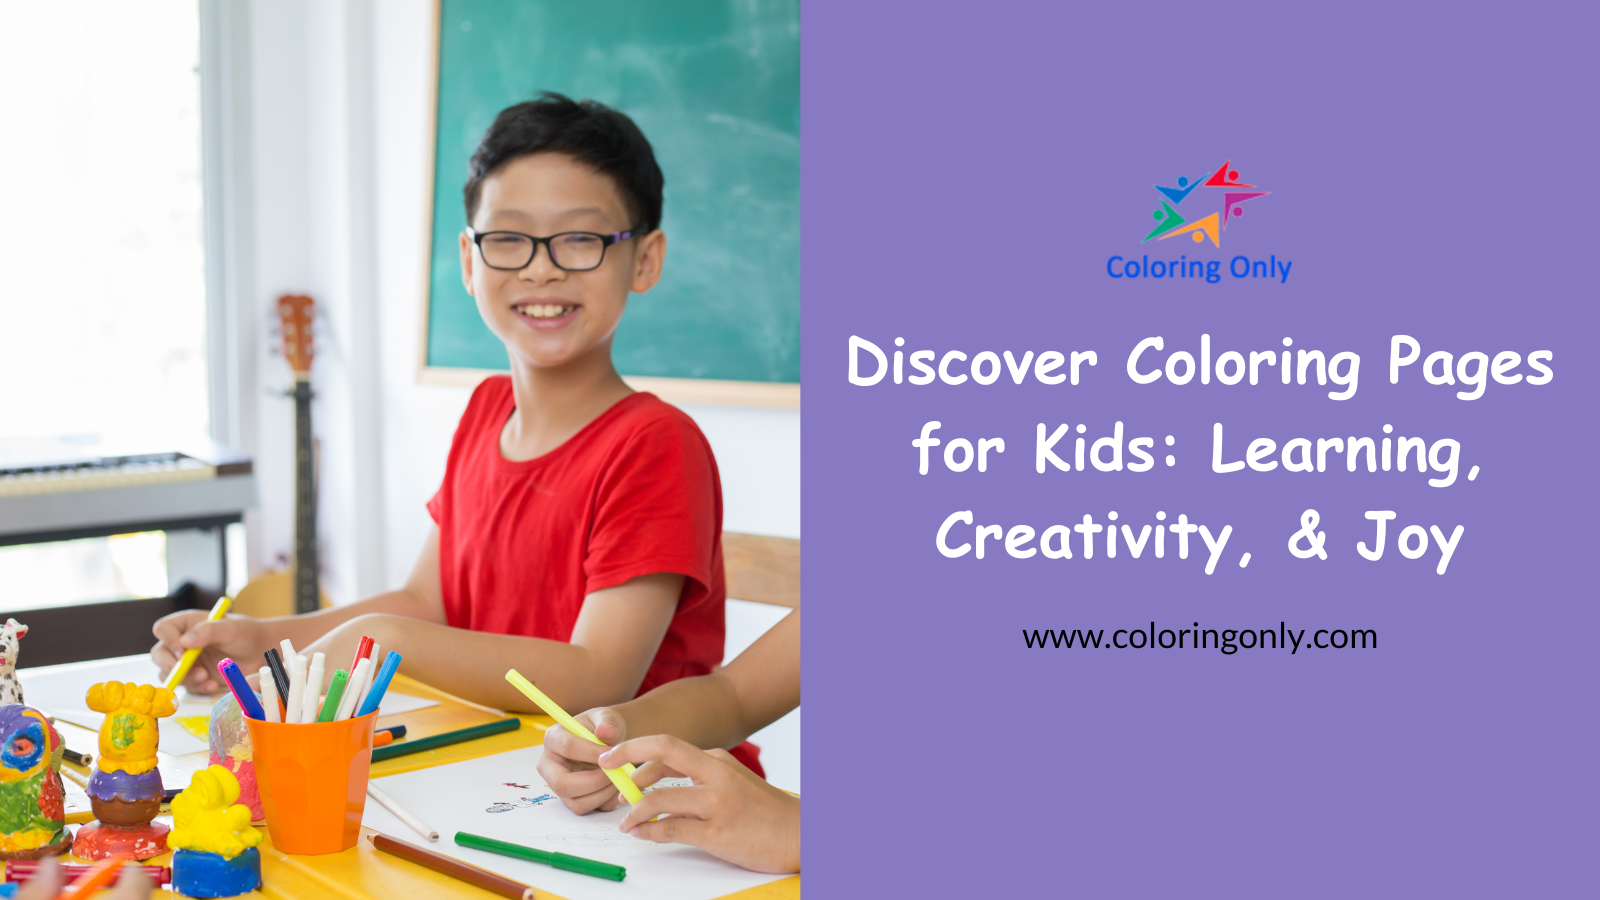 Discover Coloring Pages for Kids: Learning, Creativity, & Joy